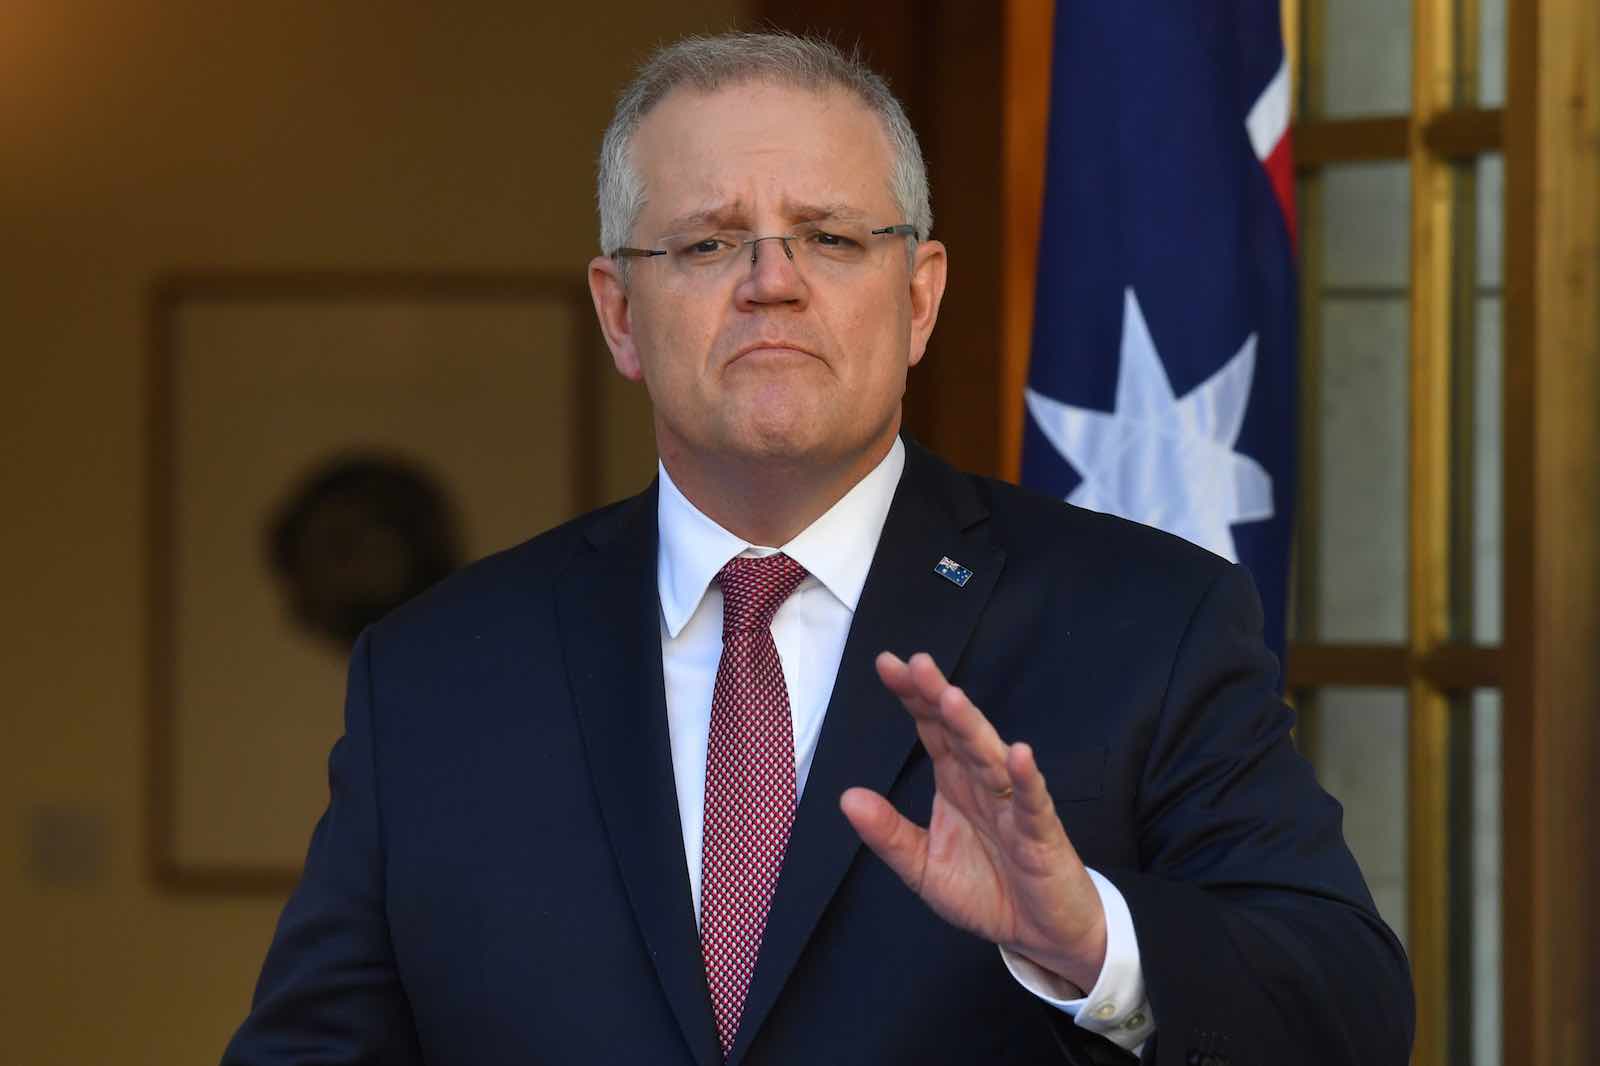 Australia’s Prime Minister Scott Morrison appears to be seeking to both reassure and deter (Sam Mooy/Getty Images)